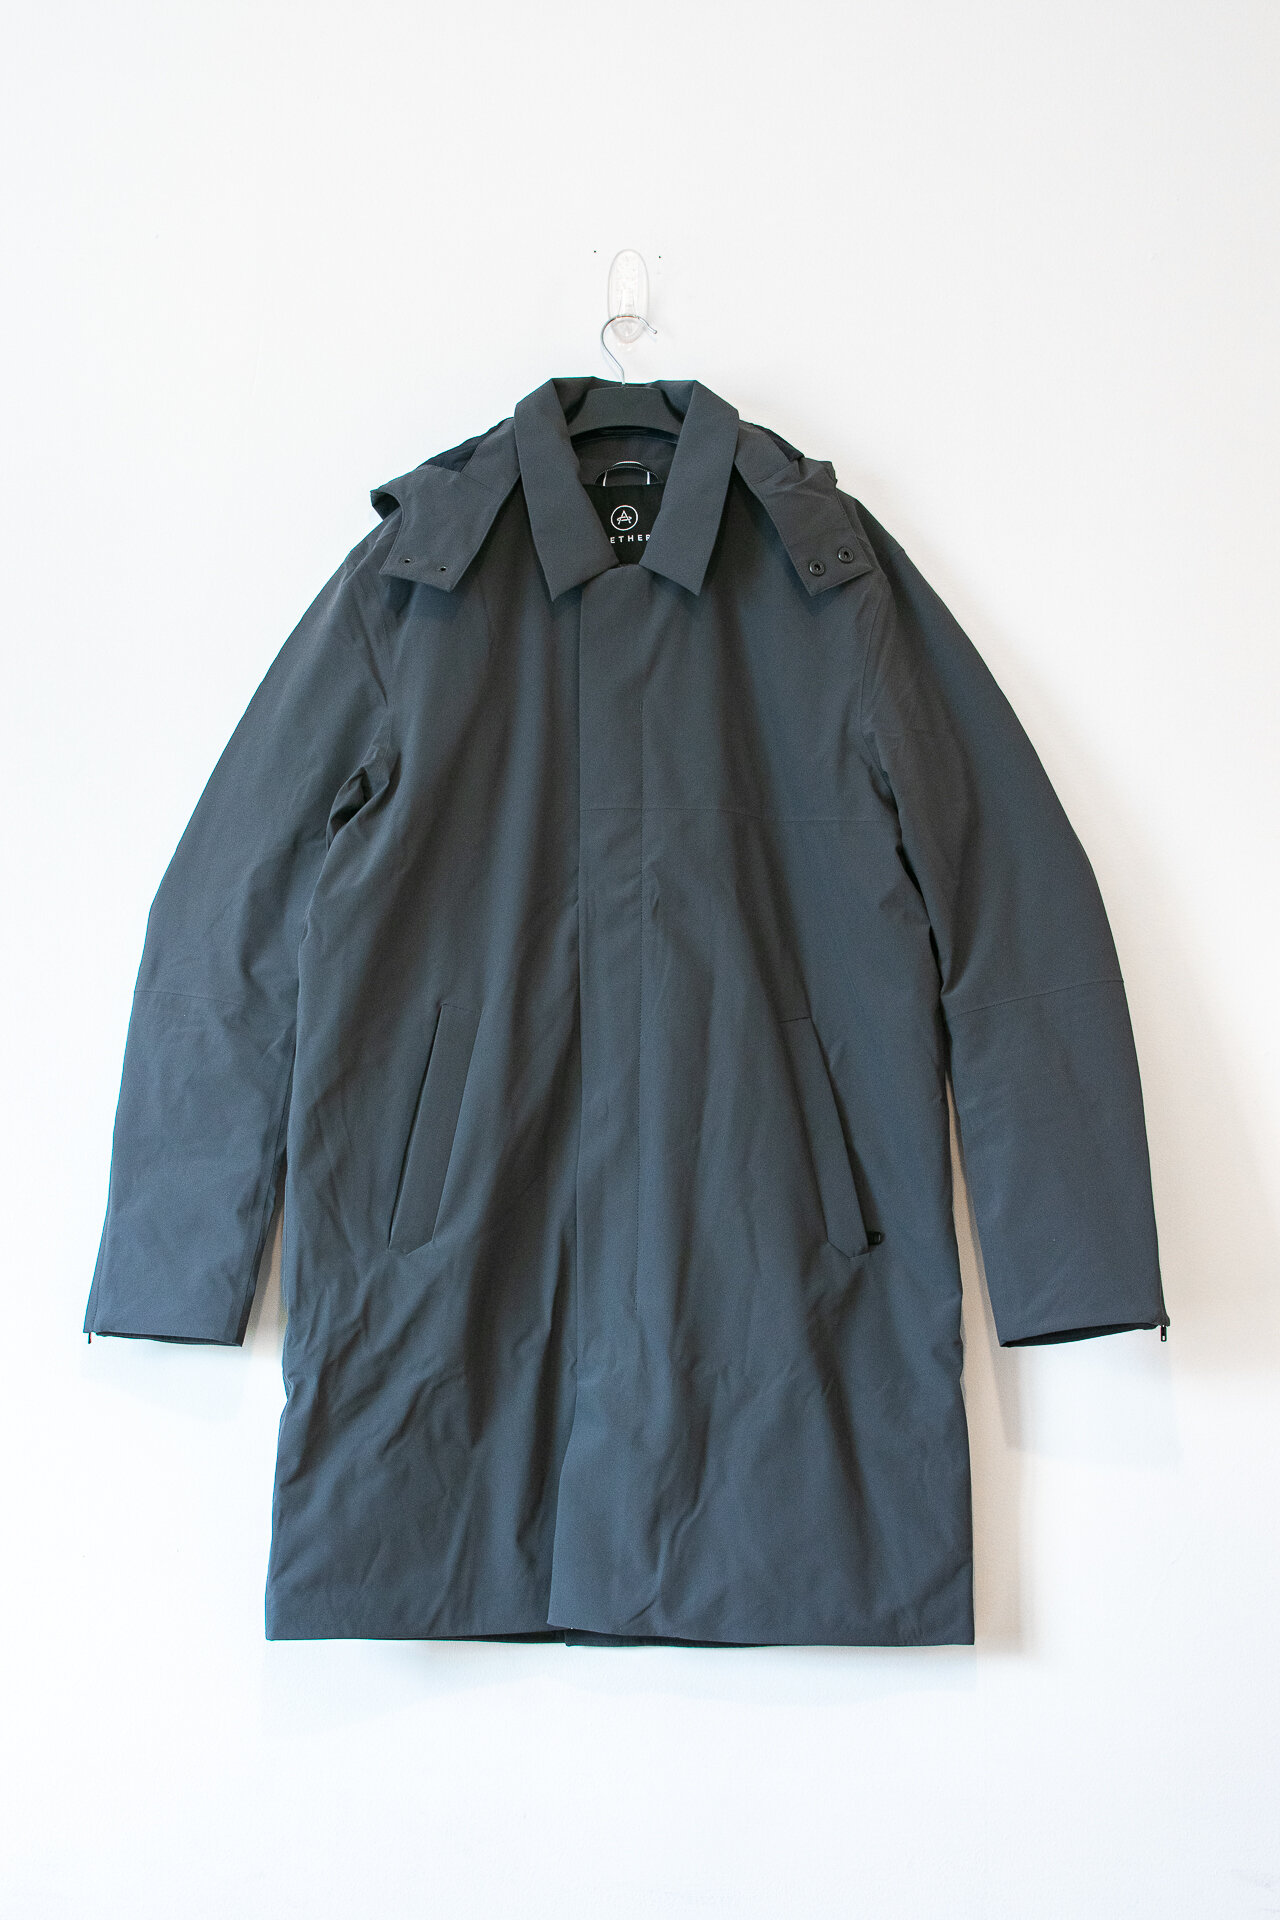 aether-barrow-jacket-front-1.jpg